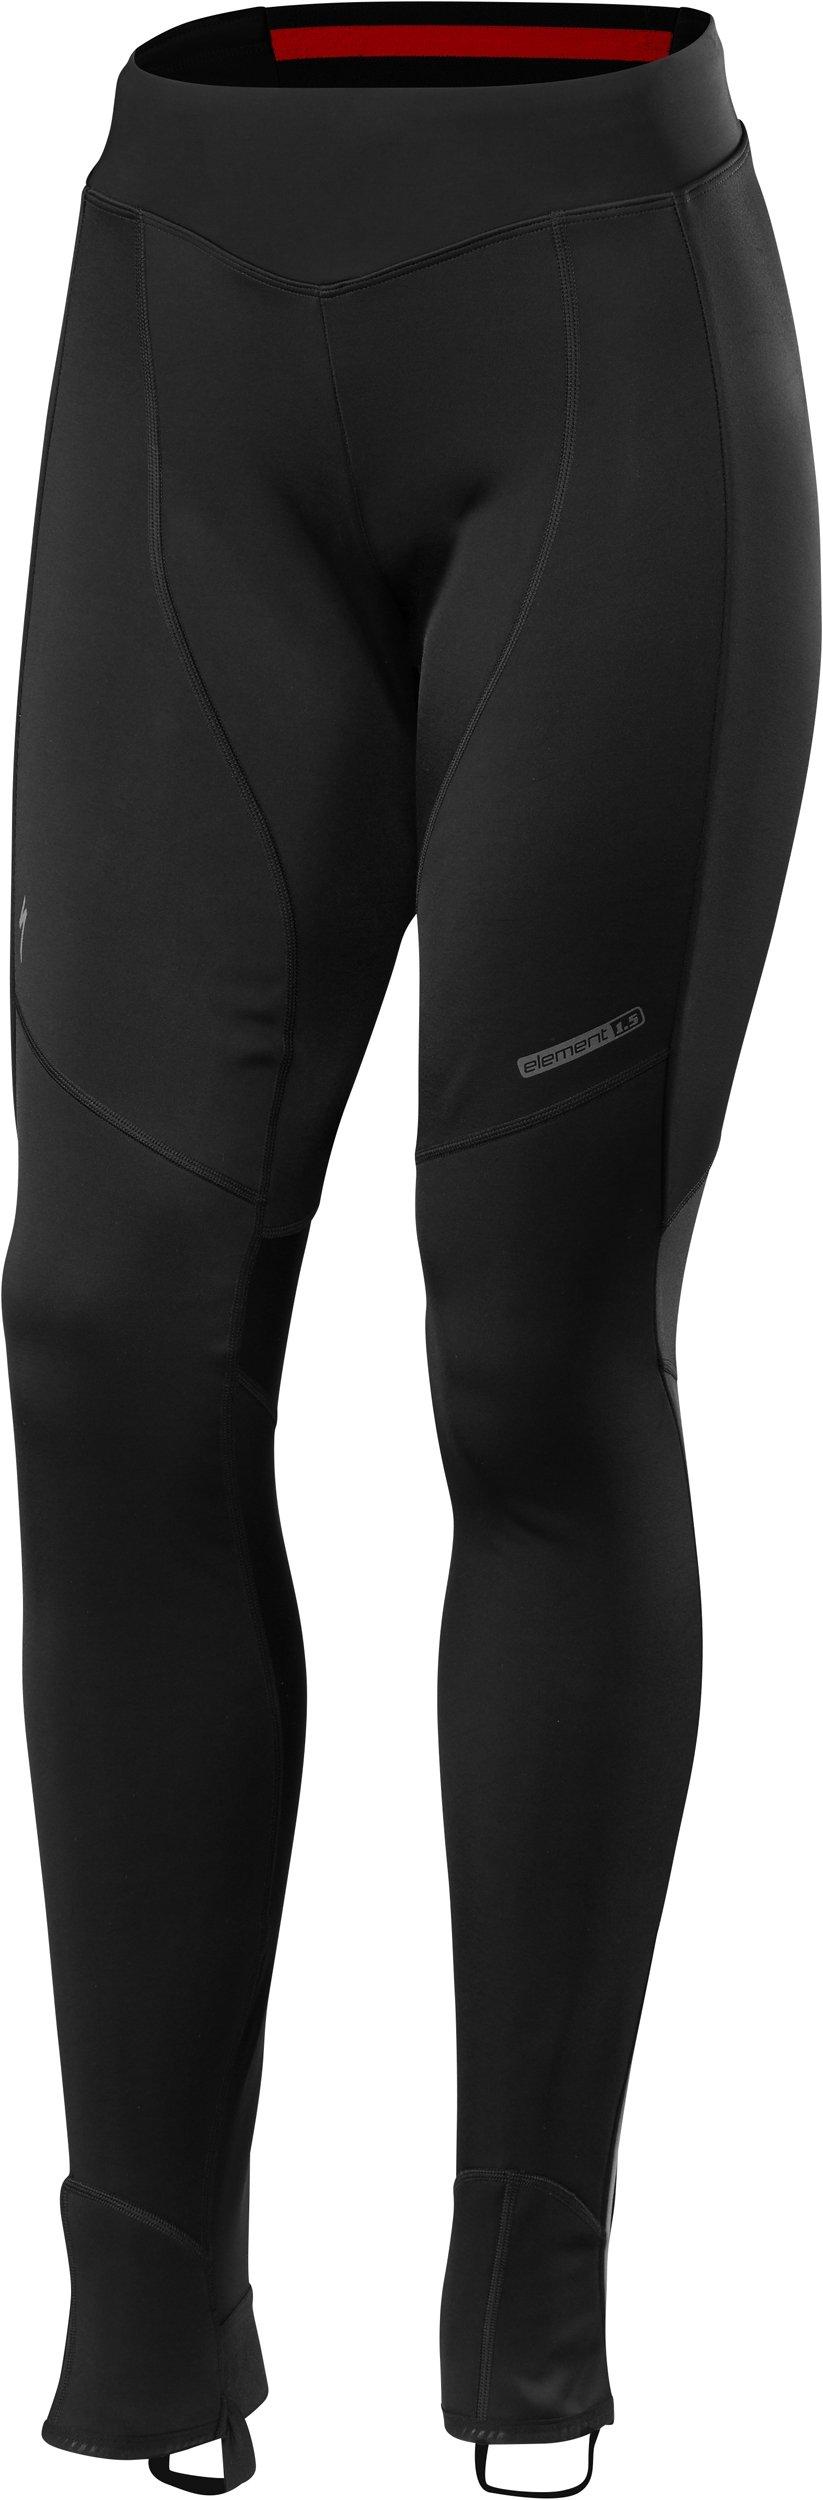 Look back tyrant mode Women's Element Tights – No Chamois | Specialized.com